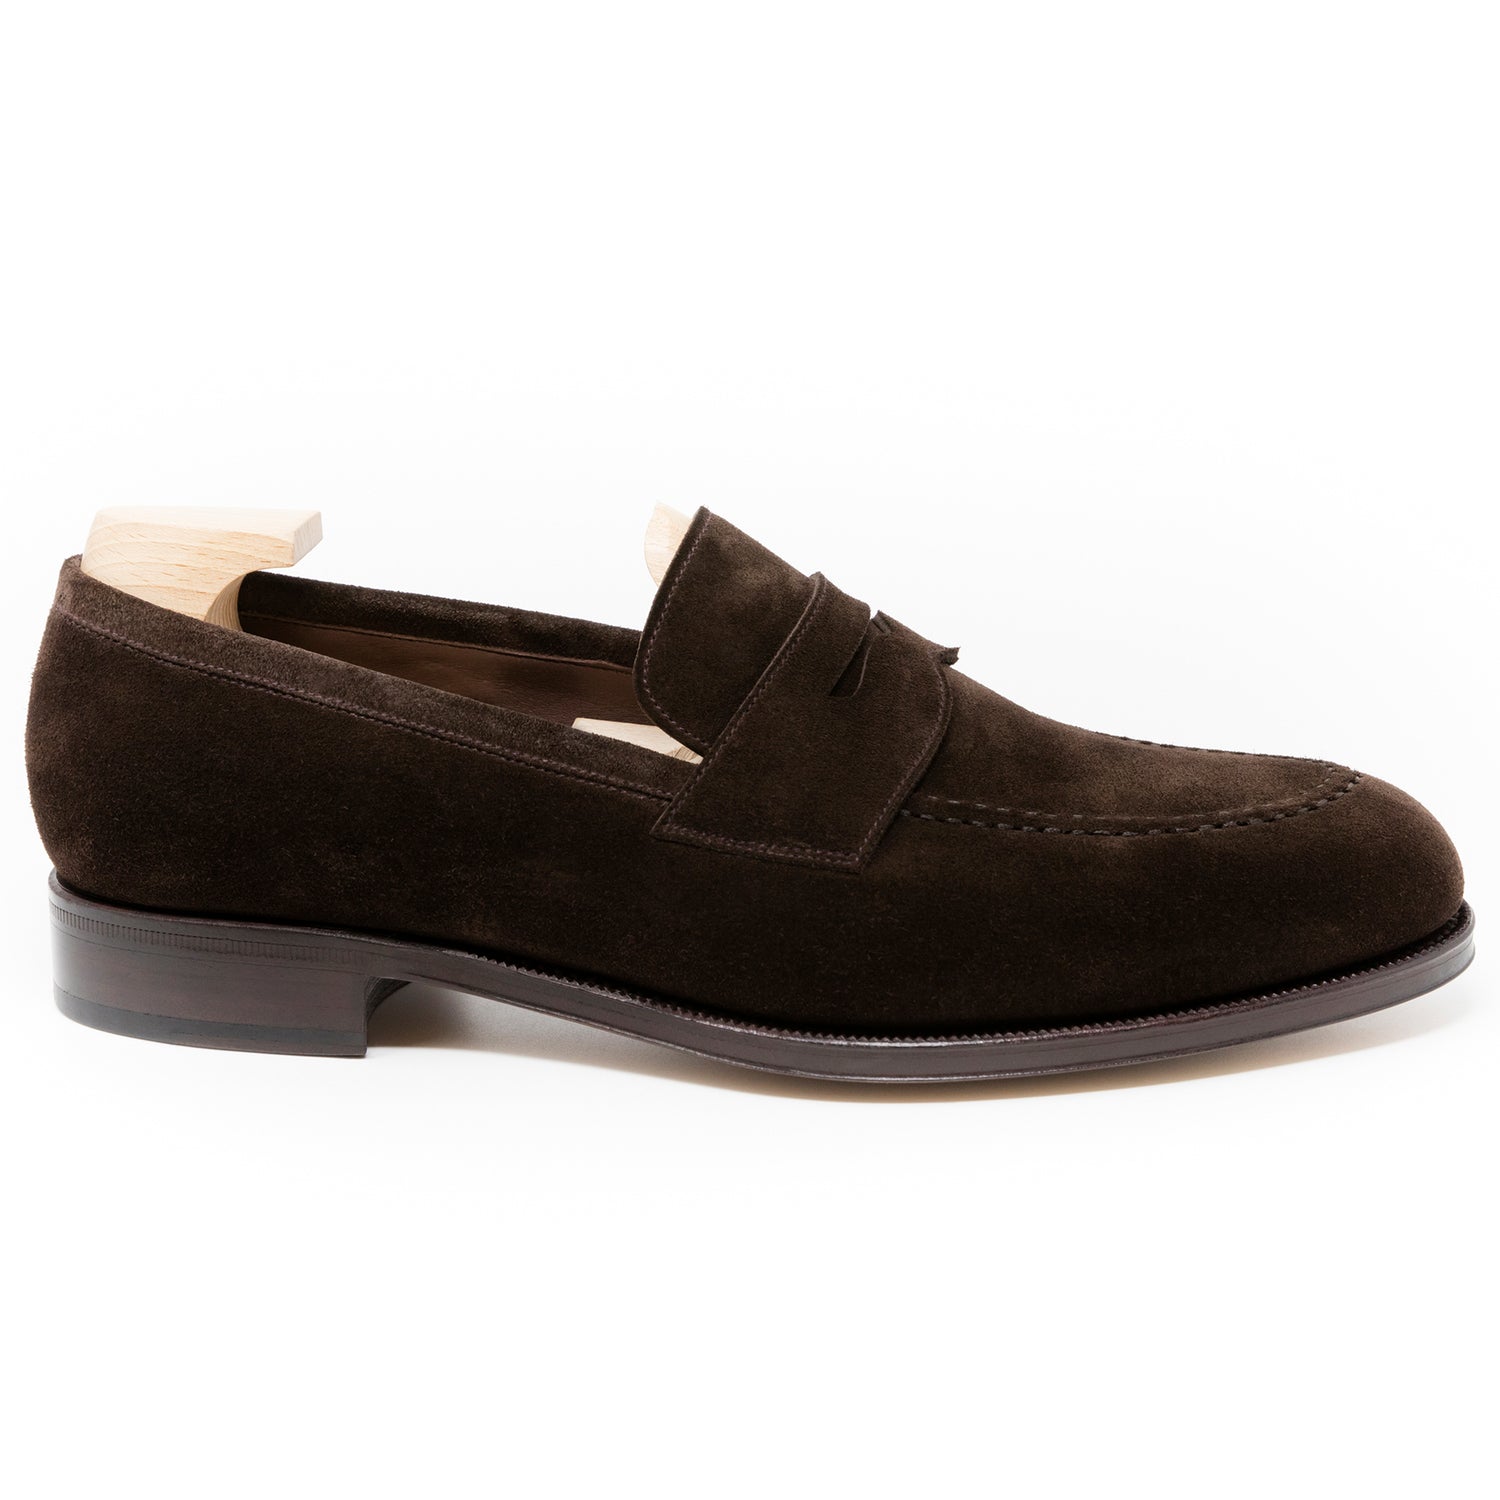 TLB Mallorca leather shoes 545 / JONES / SUEDE BROWN